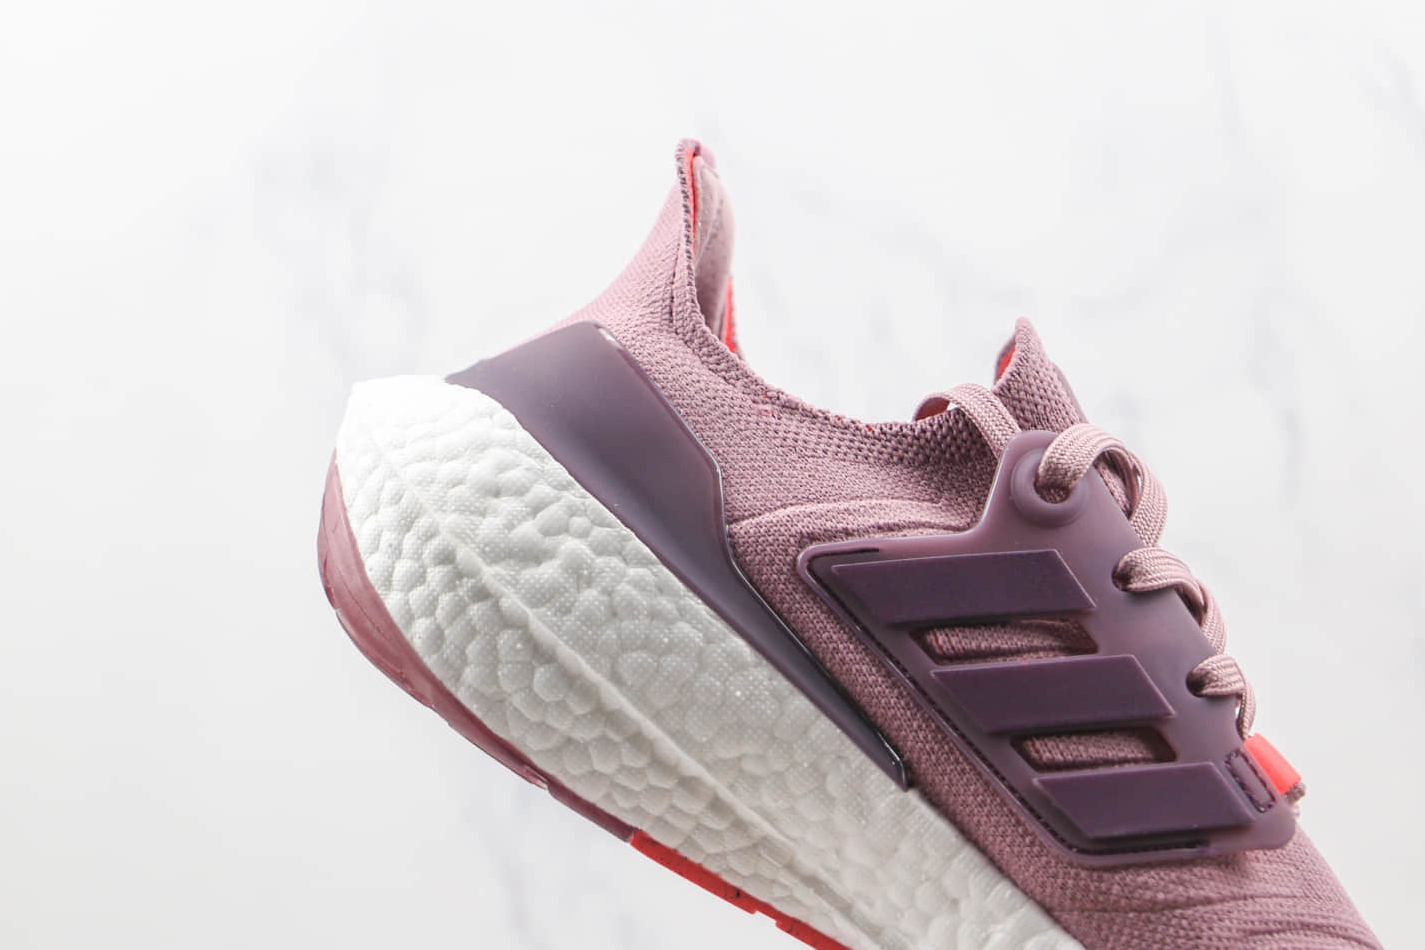 Adidas UltraBoost 22 'Magic Mauve' GX5588 - The Ultimate Running Shoe for Enhanced Performance!